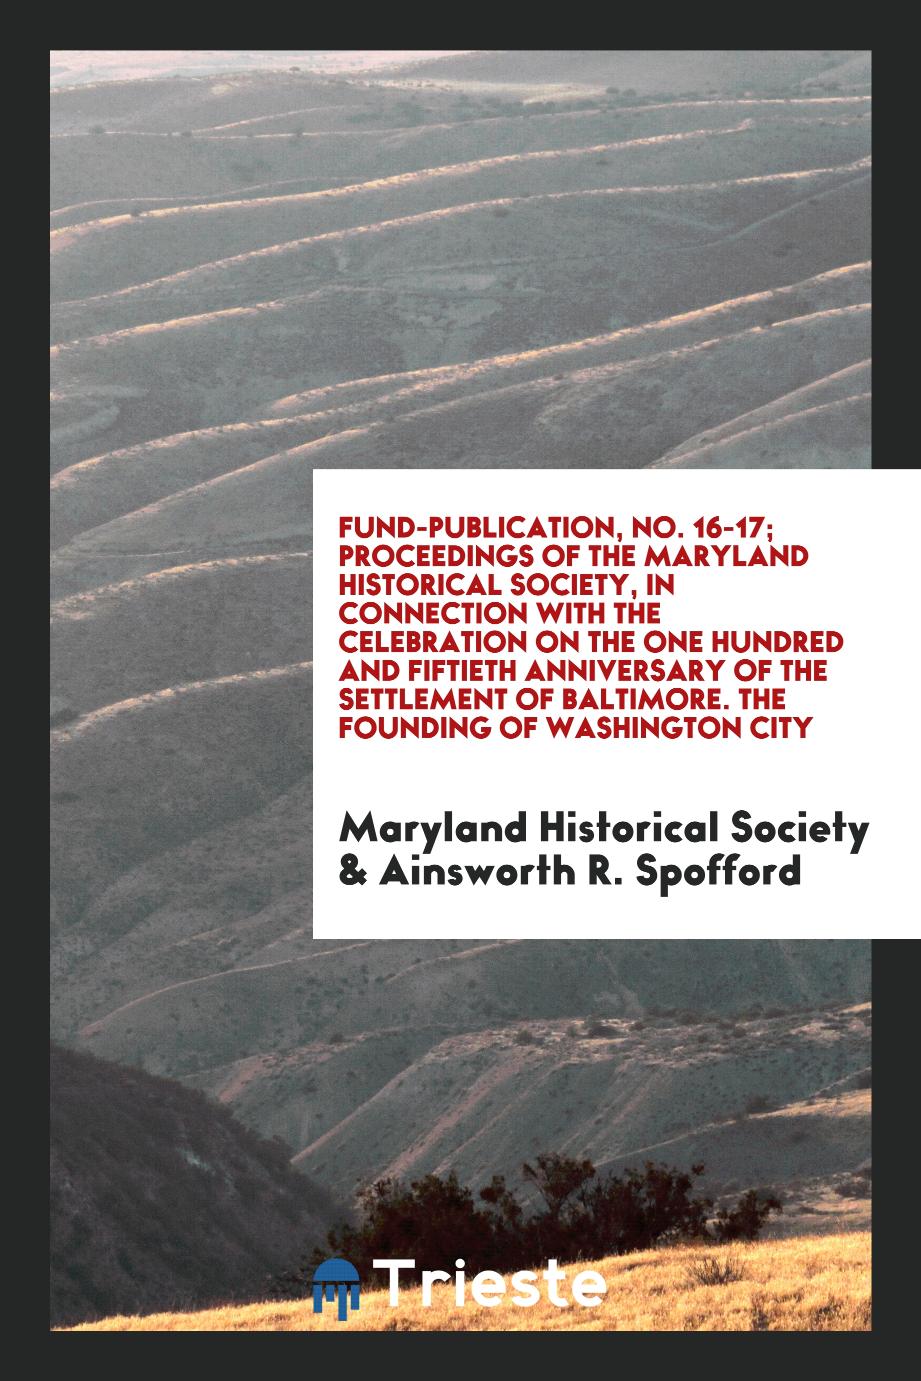 Fund-Publication, No. 16-17; Proceedings of the Maryland Historical Society, in Connection with the Celebration on the One Hundred and Fiftieth Anniversary of the Settlement of Baltimore. The Founding of Washington City